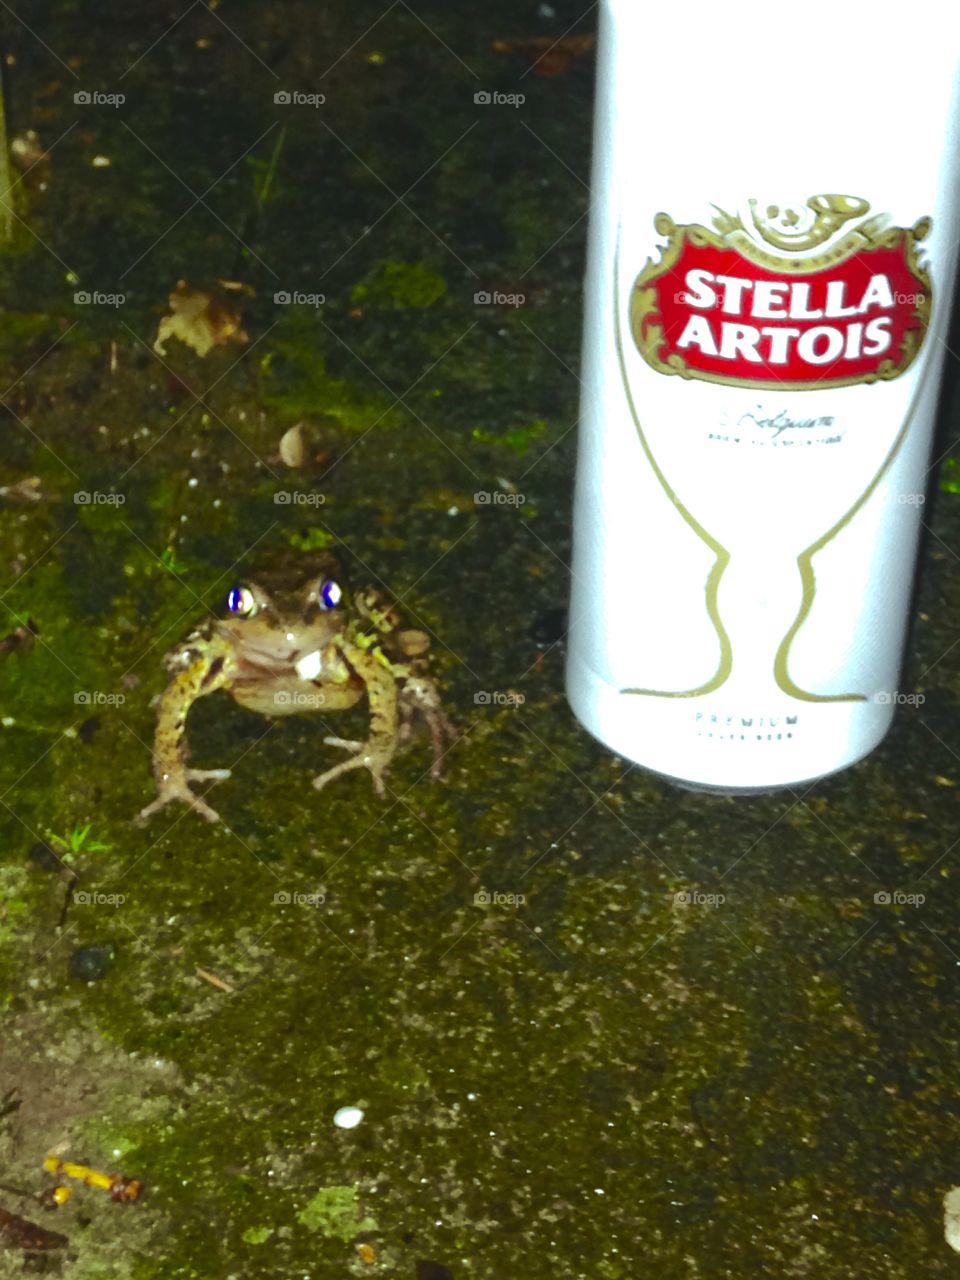 Toadly in the beer